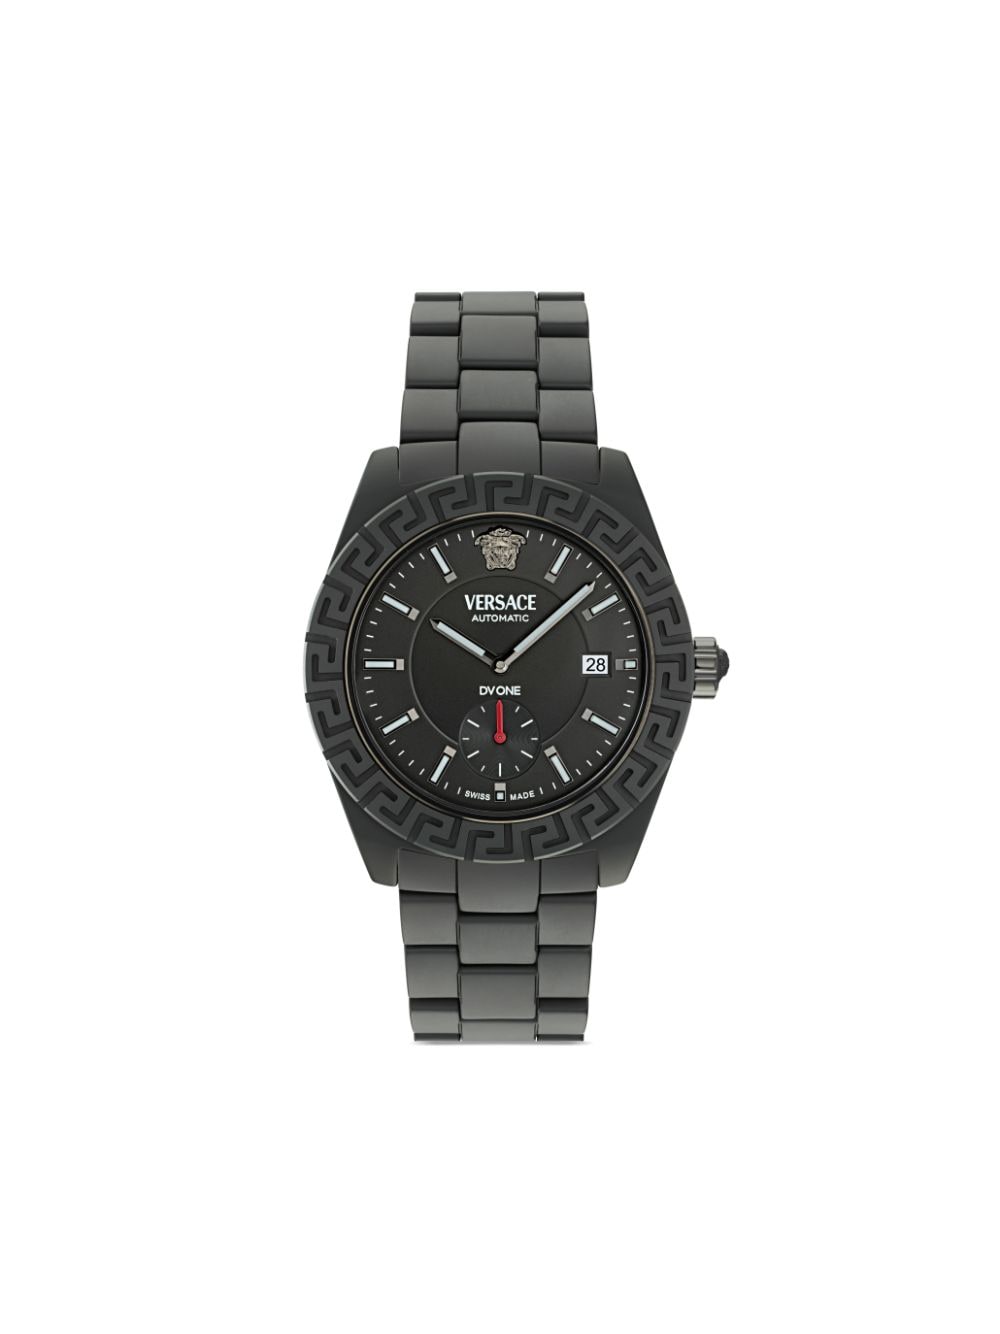 Shop Versace Dv One Automatic 43mm In Black